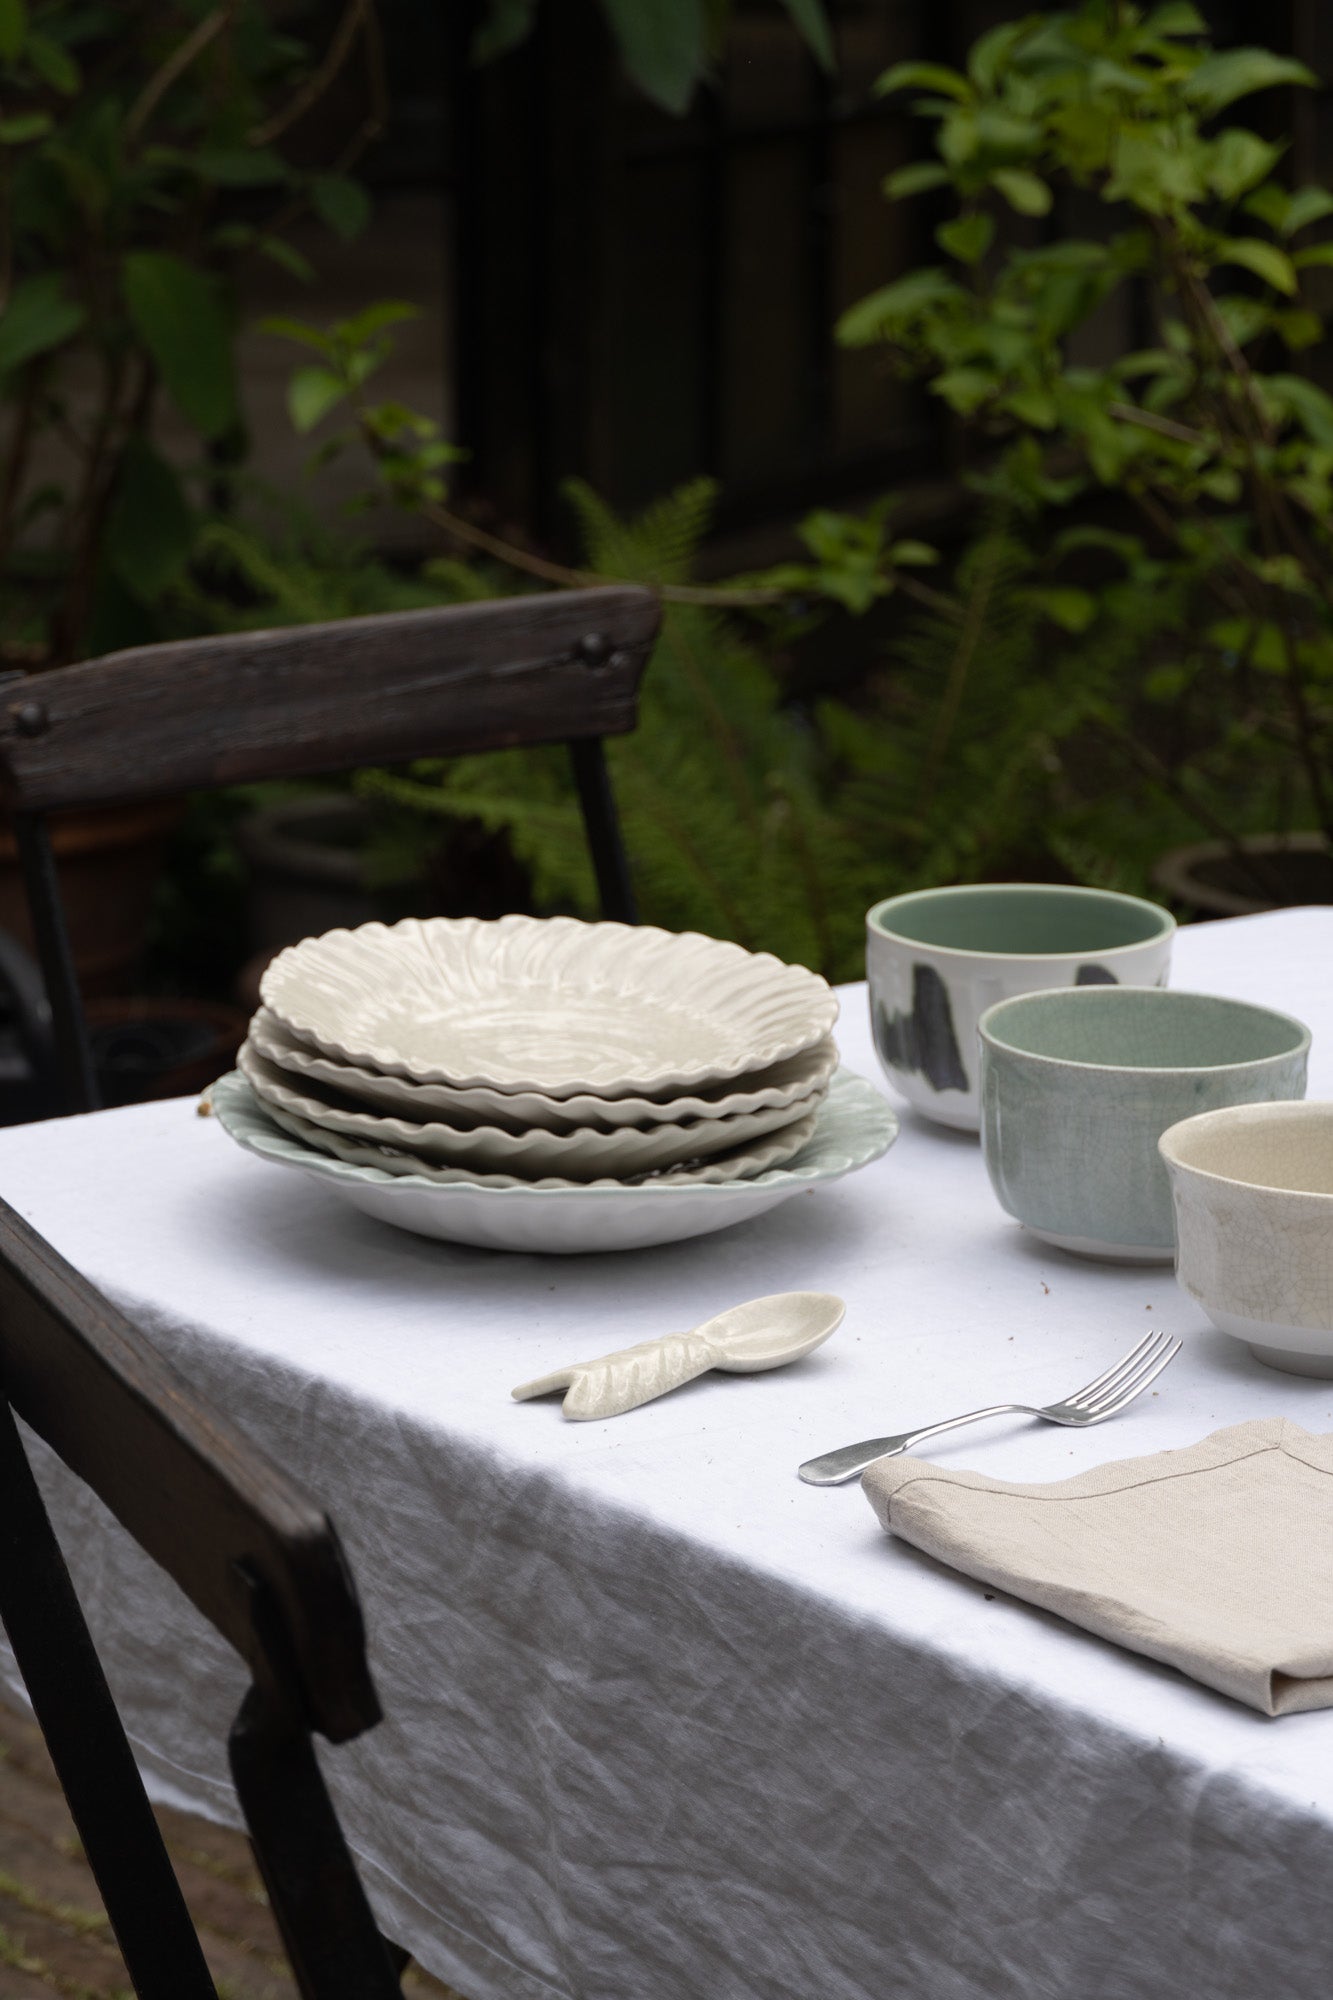 Outdoors table setting with items from Jars Ceramistes.